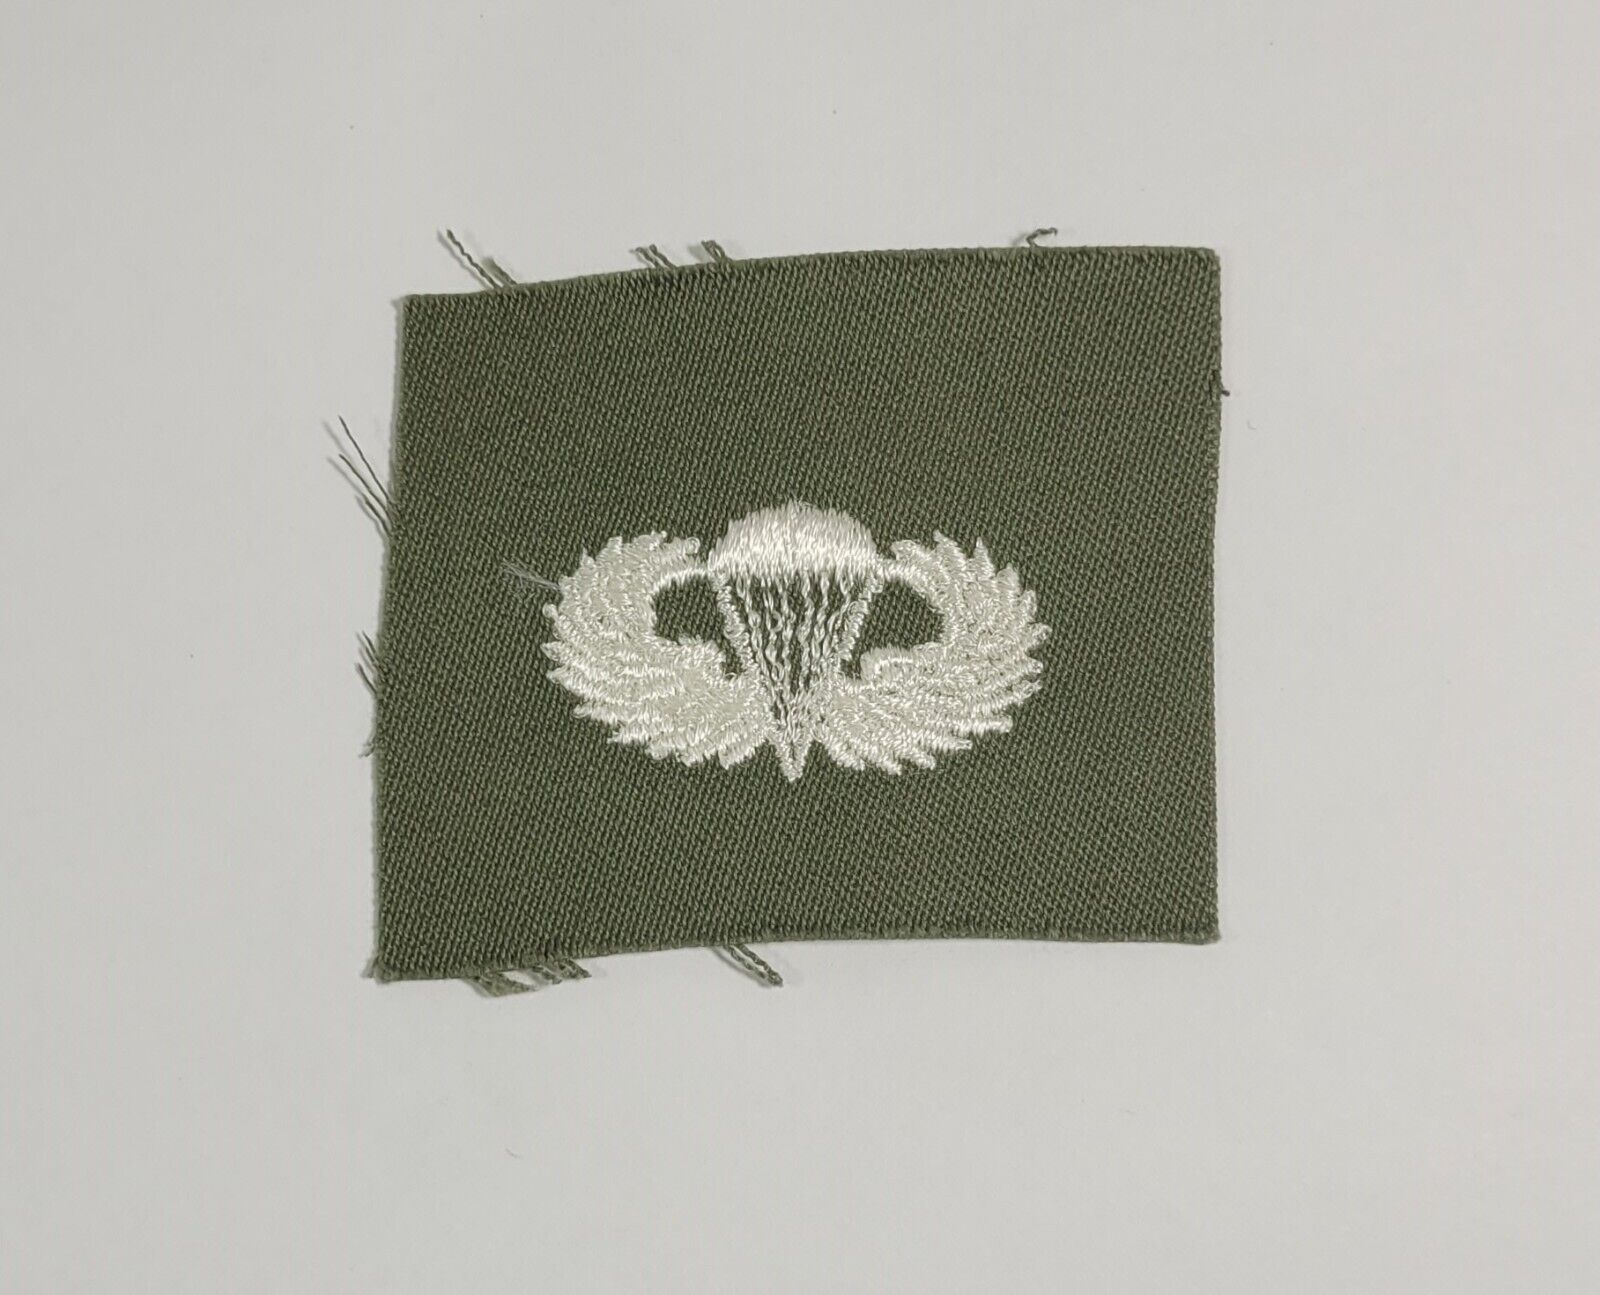 US ARMY WHITE PARATROOPER WINGS AIRBORNE TAB VIETNAM/COLD WAR ERA PATCH